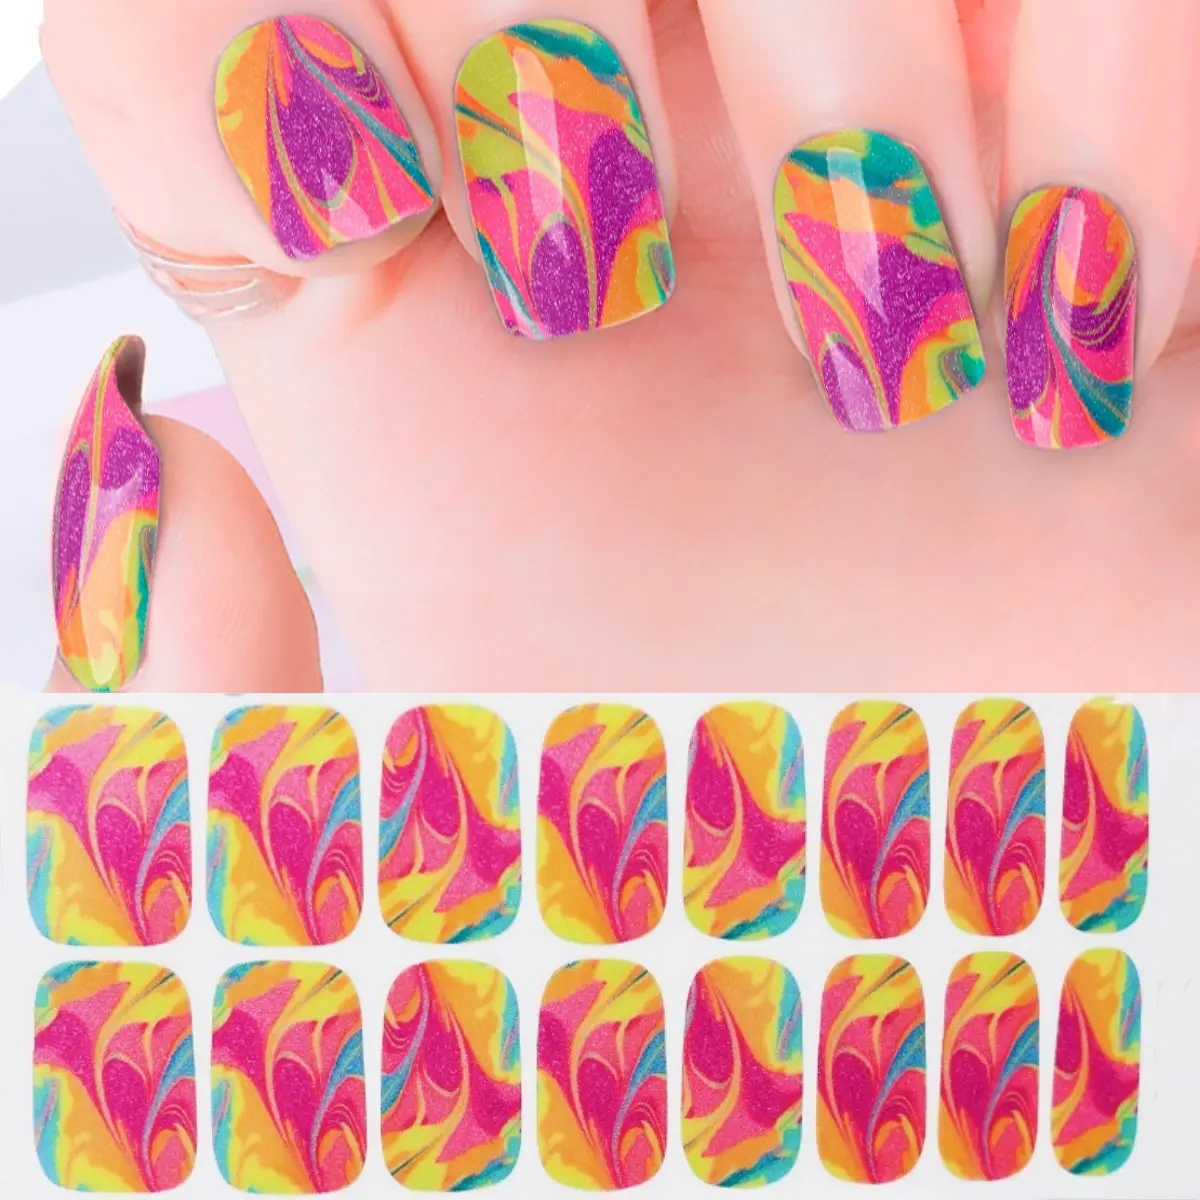 Newest Custom Non -Toxic nail polish stickers 2D Type Popular Nail Wraps Paper Without UV Lamp